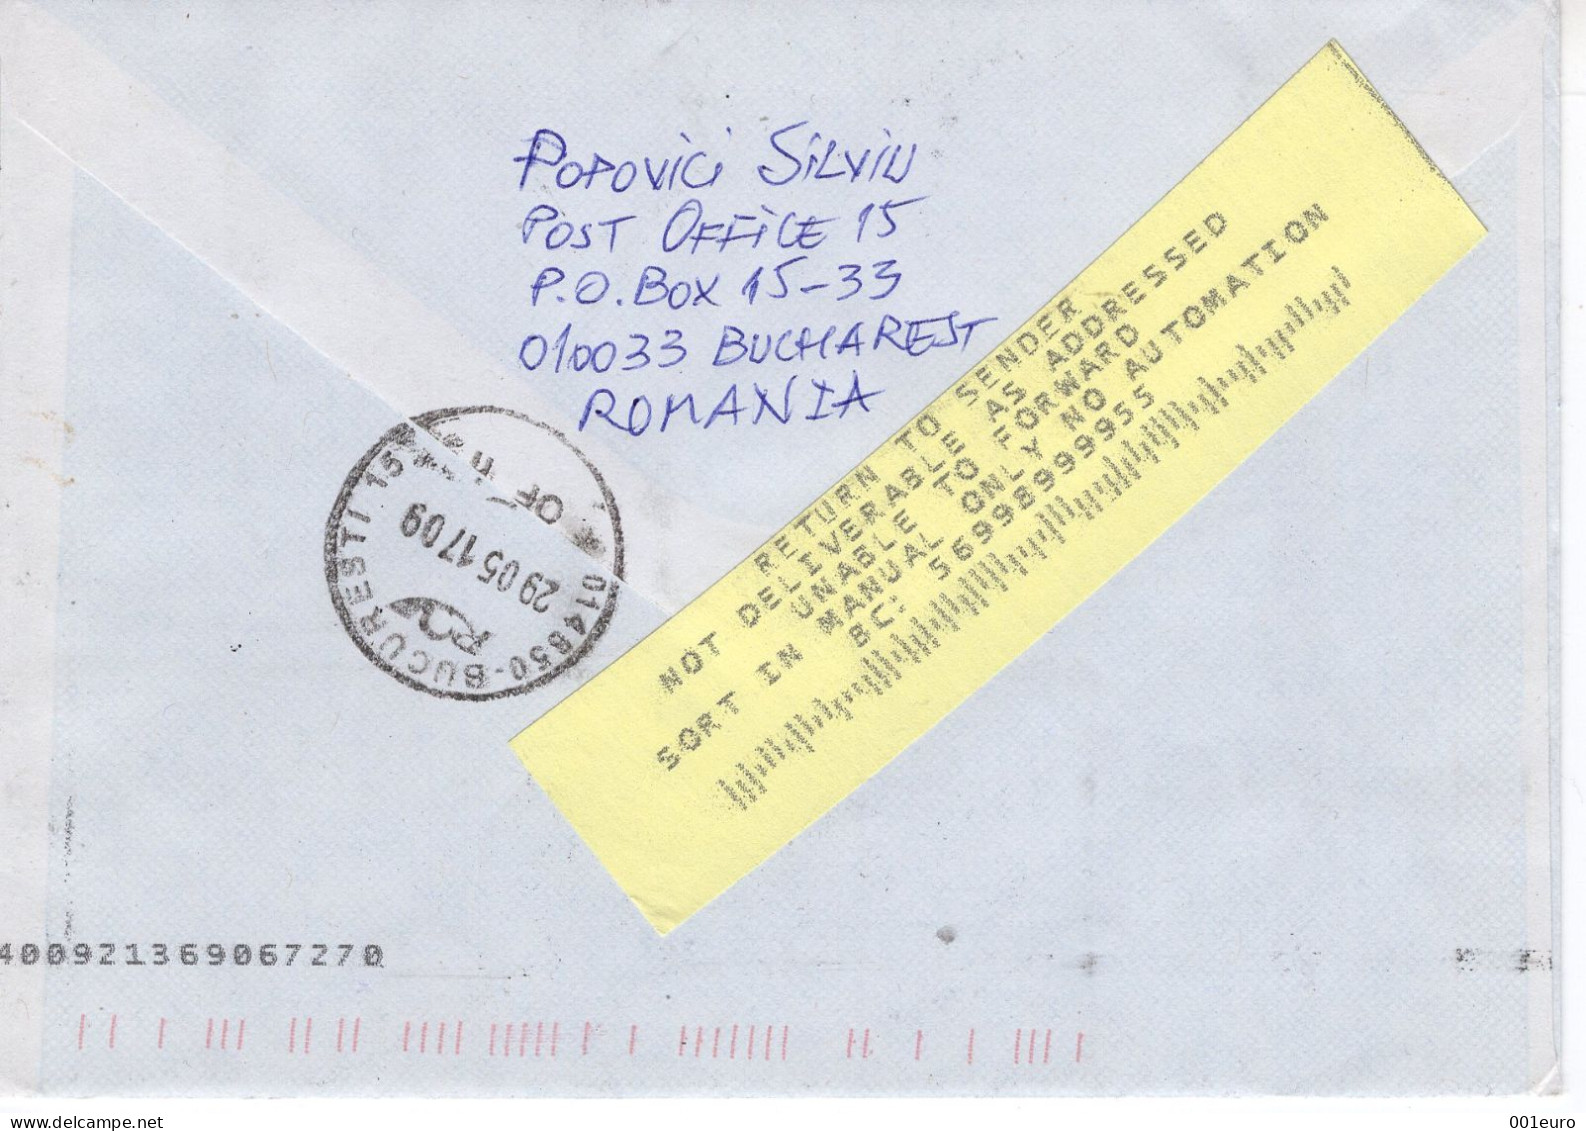 ROMANIA: TRAIN ORIENT EXPRESS, Circulated Cover - Registered Shipping! - Usado